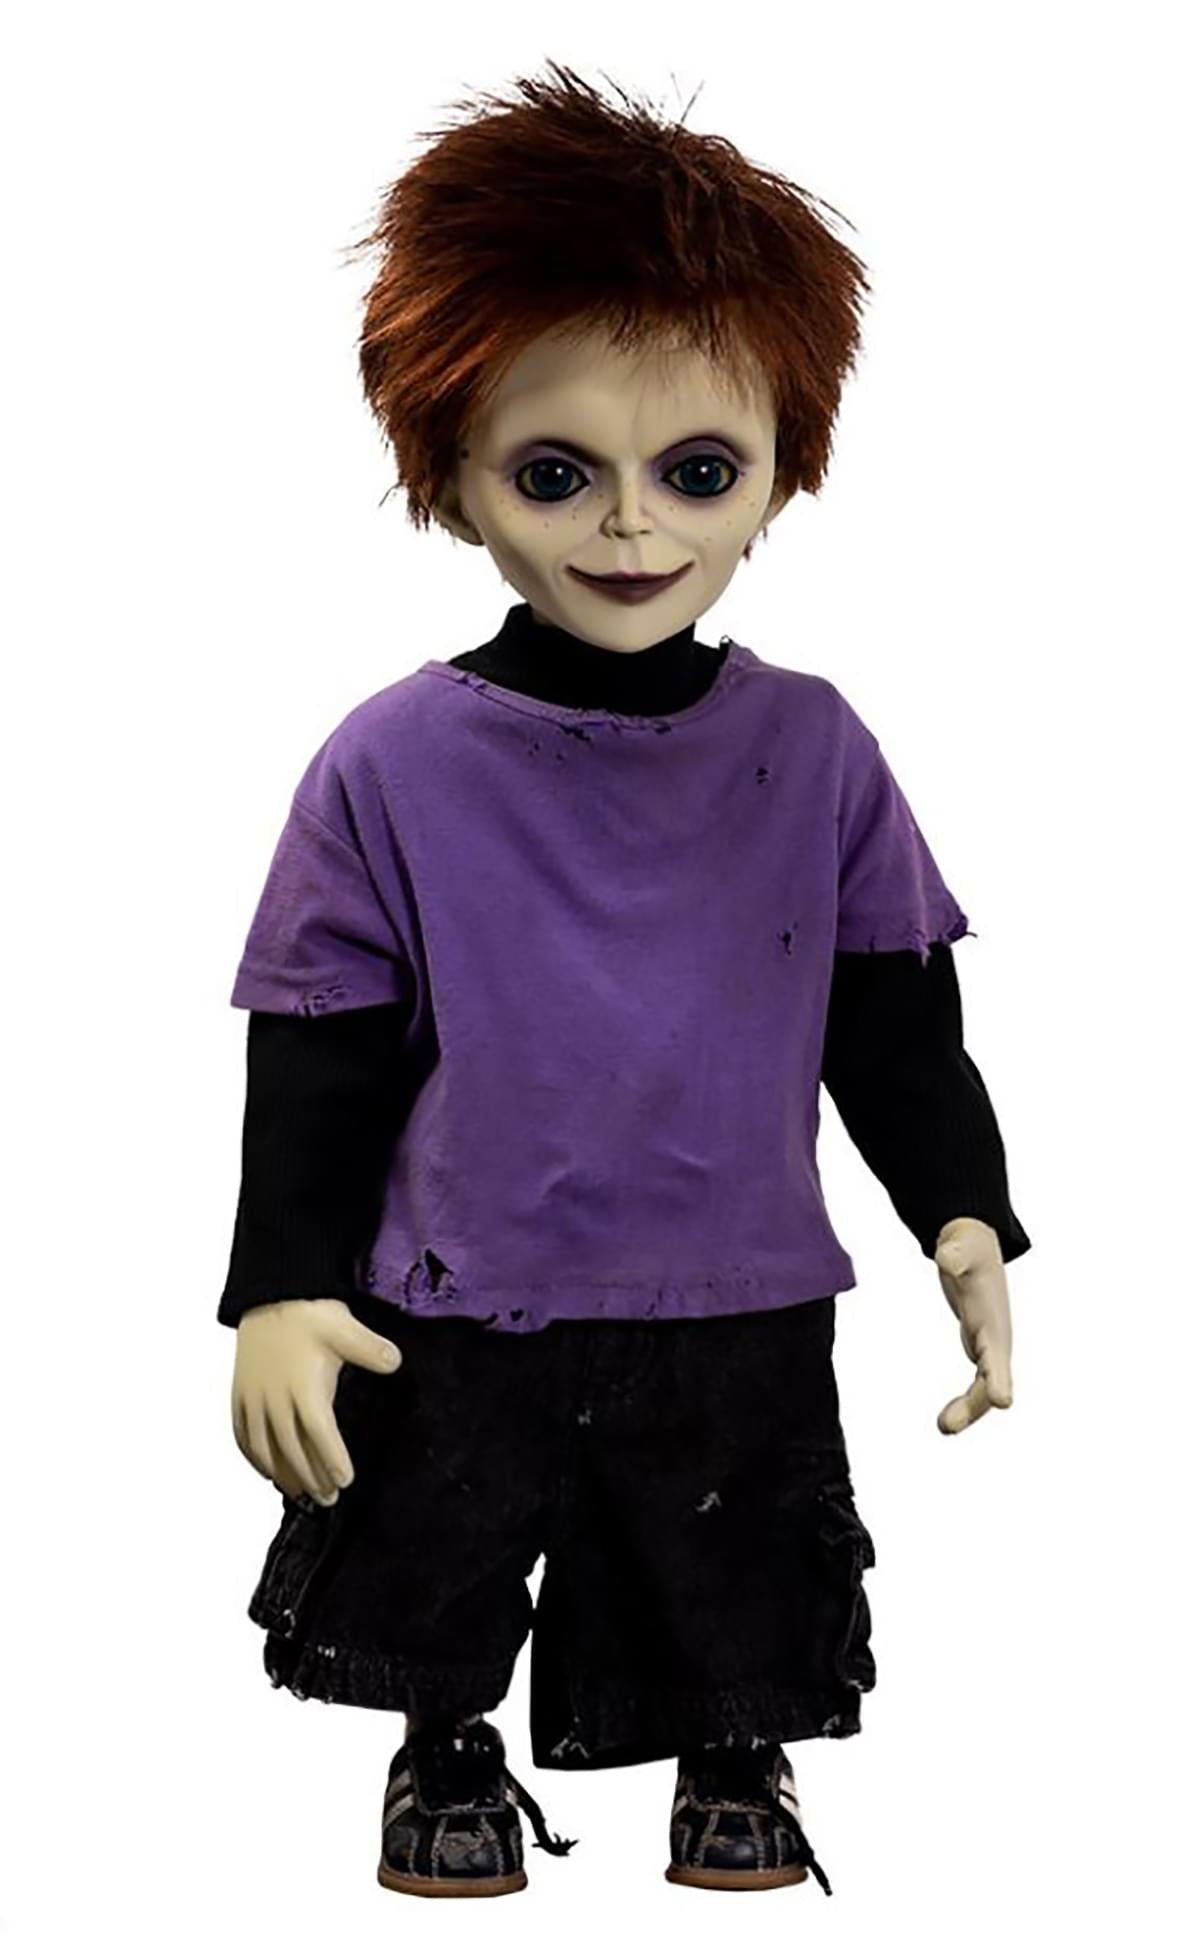 Childs Play Seed of Chucky One-To-One Scale Glen Doll Replica